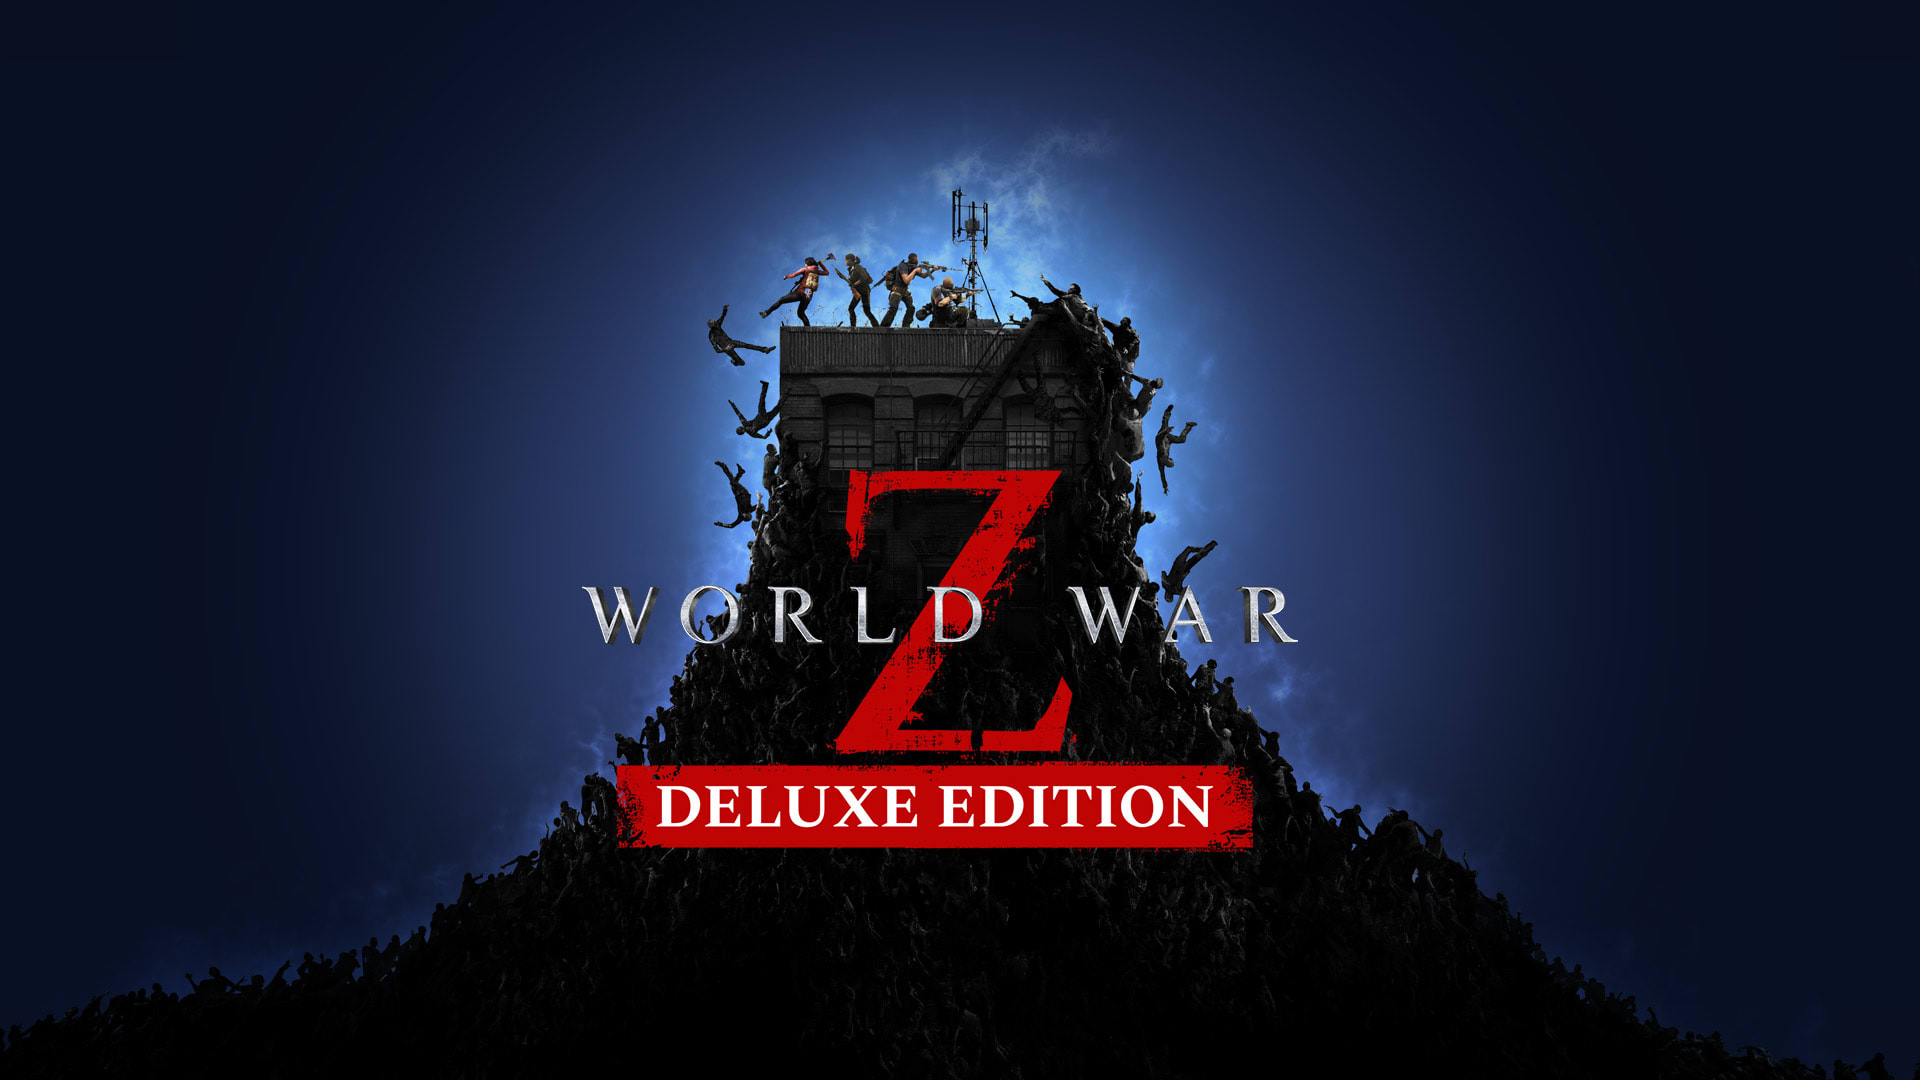 World War Z - Deluxe Edition